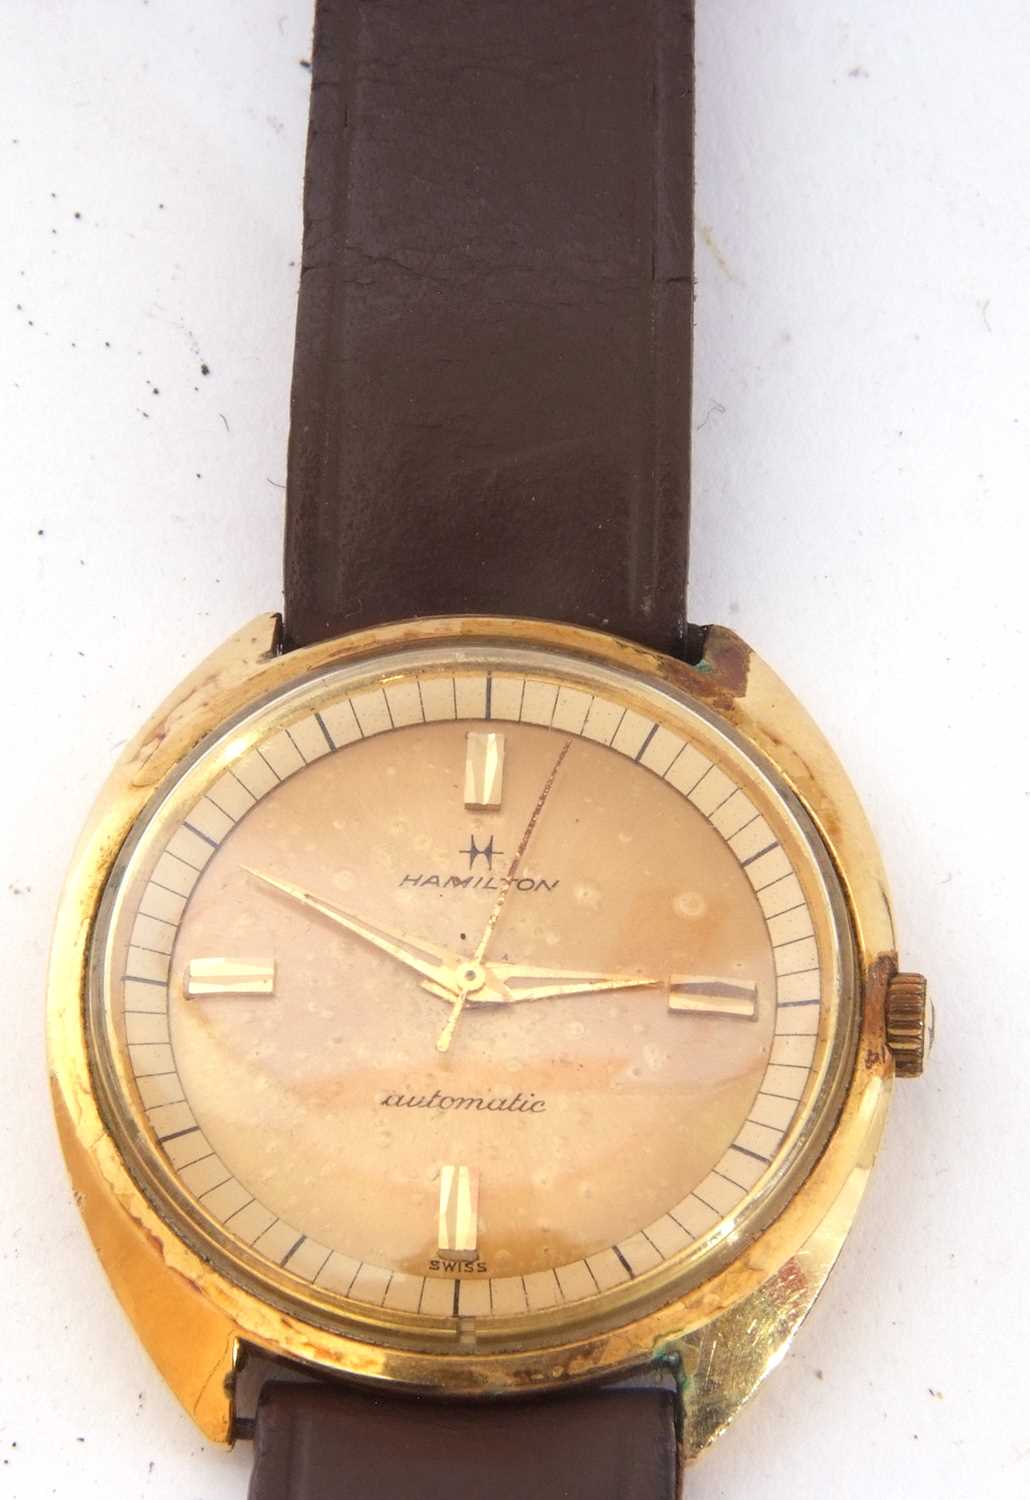 Vintage gent's Hamilton automatic wrist watch, a yellow metal case and dial with yellow metal hands, - Image 2 of 4